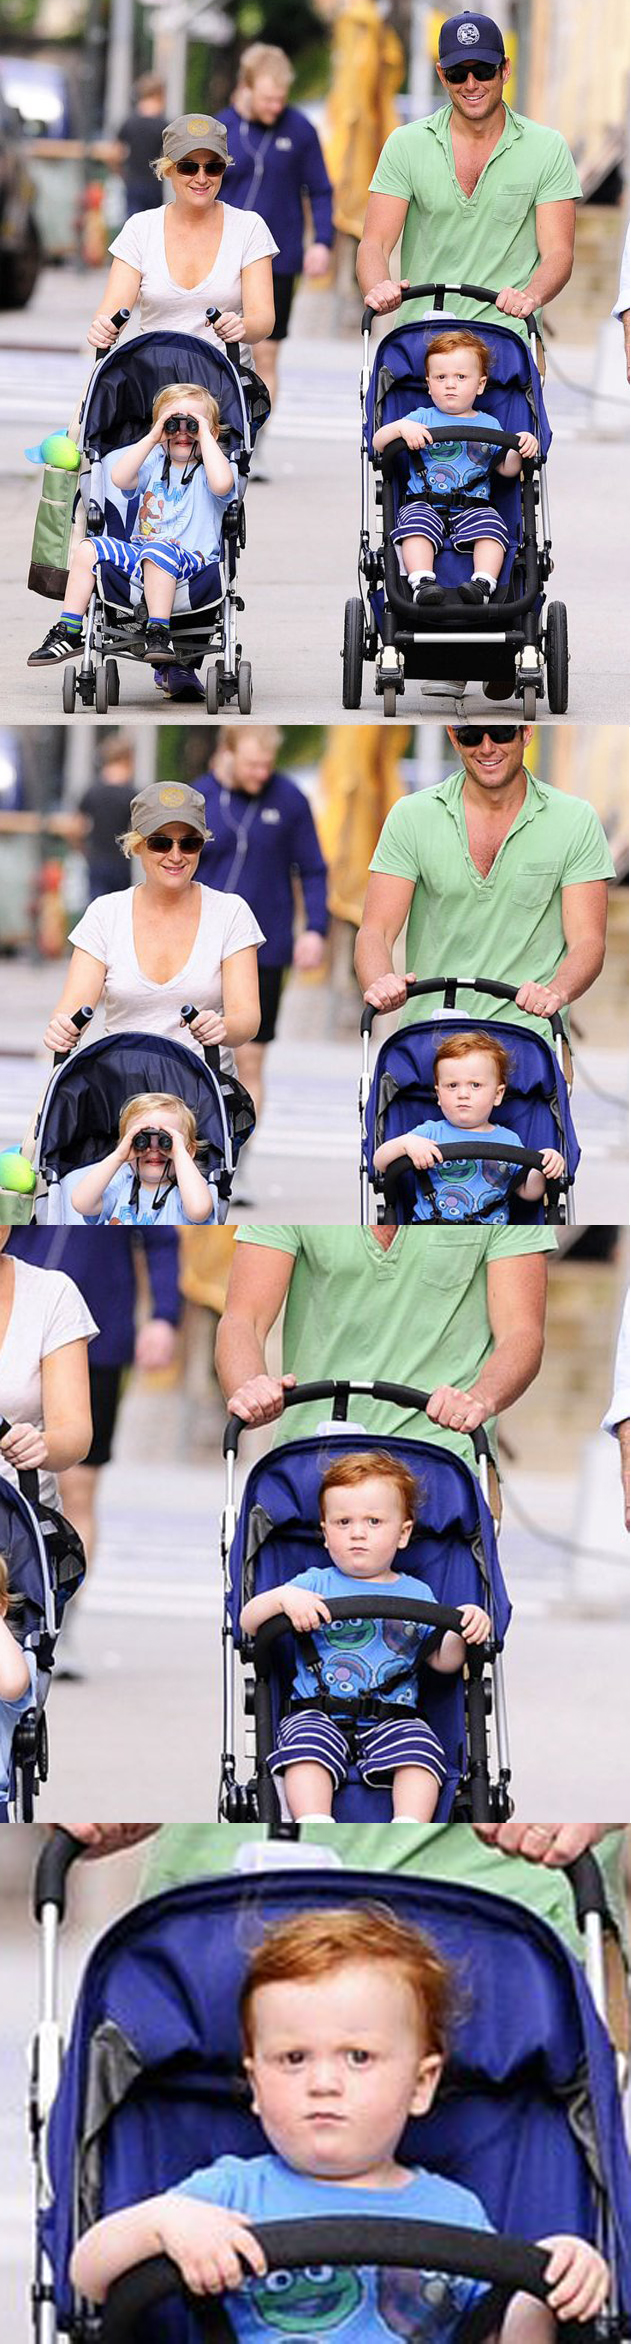 Amy Poehler and Will Arnett out for a stroll with their children...